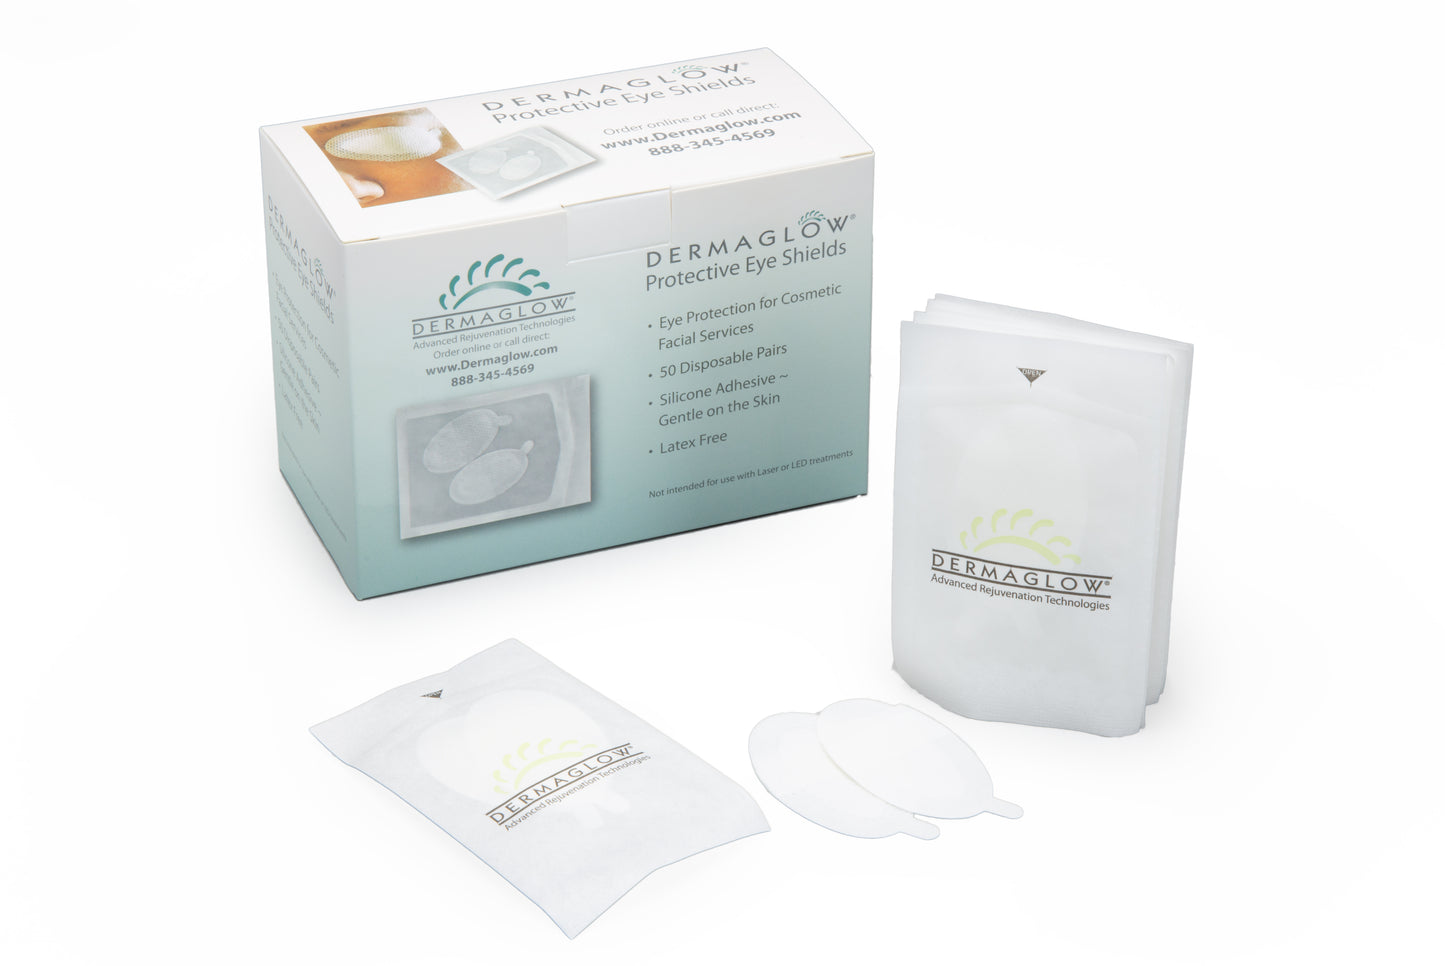 Dermaglow Protective Eye Shield For Facial Procedures (SAMPLE PACK -4 Pair) Free Shipping